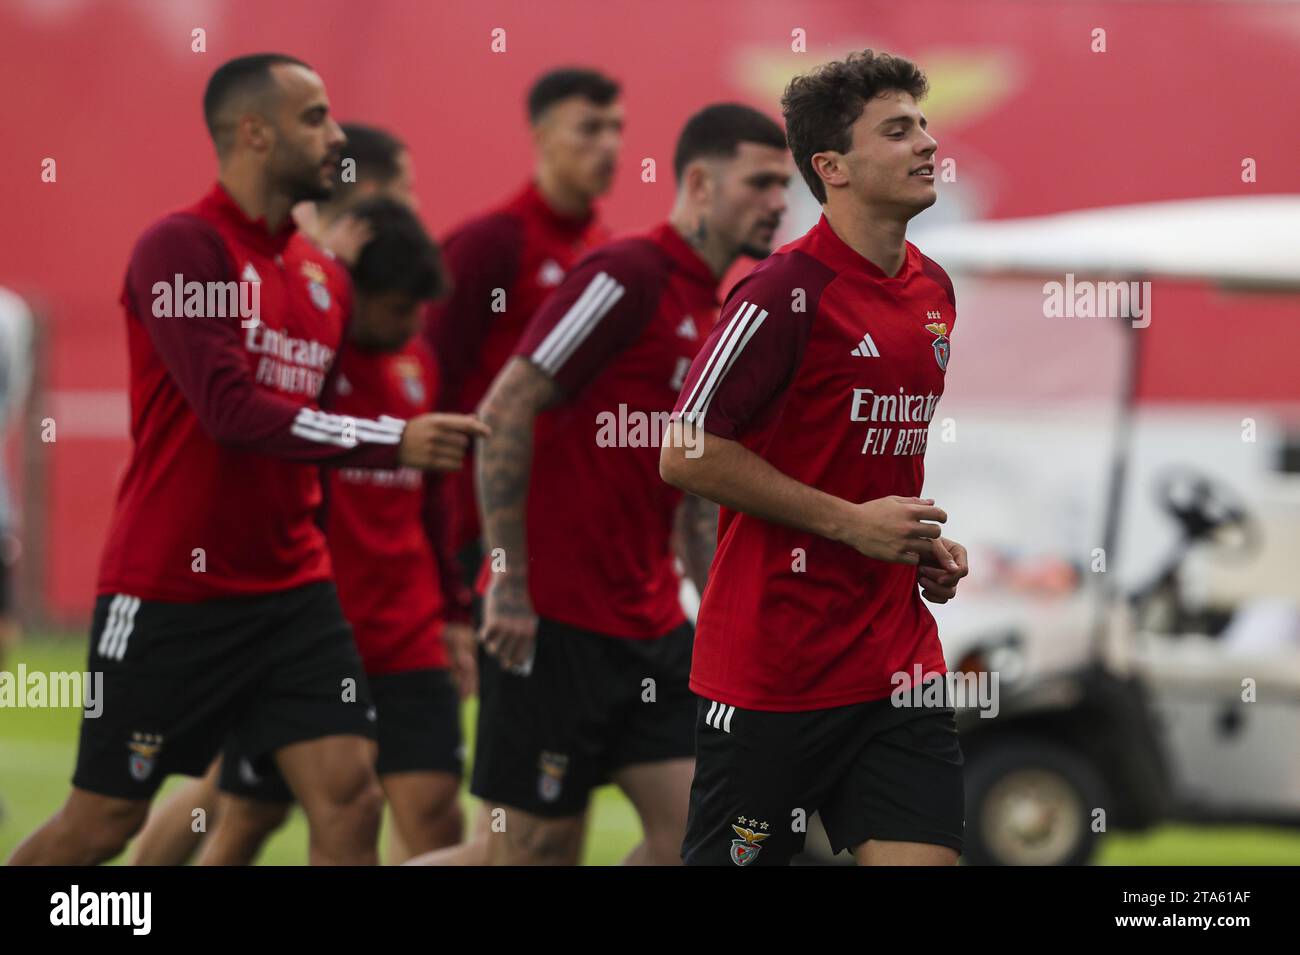 Seixal, 11/28/2023 - Sport Lisboa e Benfica trained this afternoon at the club'spus in SeixSeixal, continuing their preparation for tomorrow's gagainst Ist Inter, counting for the group stage of the Champions League 2023/24. João Neves (Pedro Rocha / Global Imagens) Stock Photo